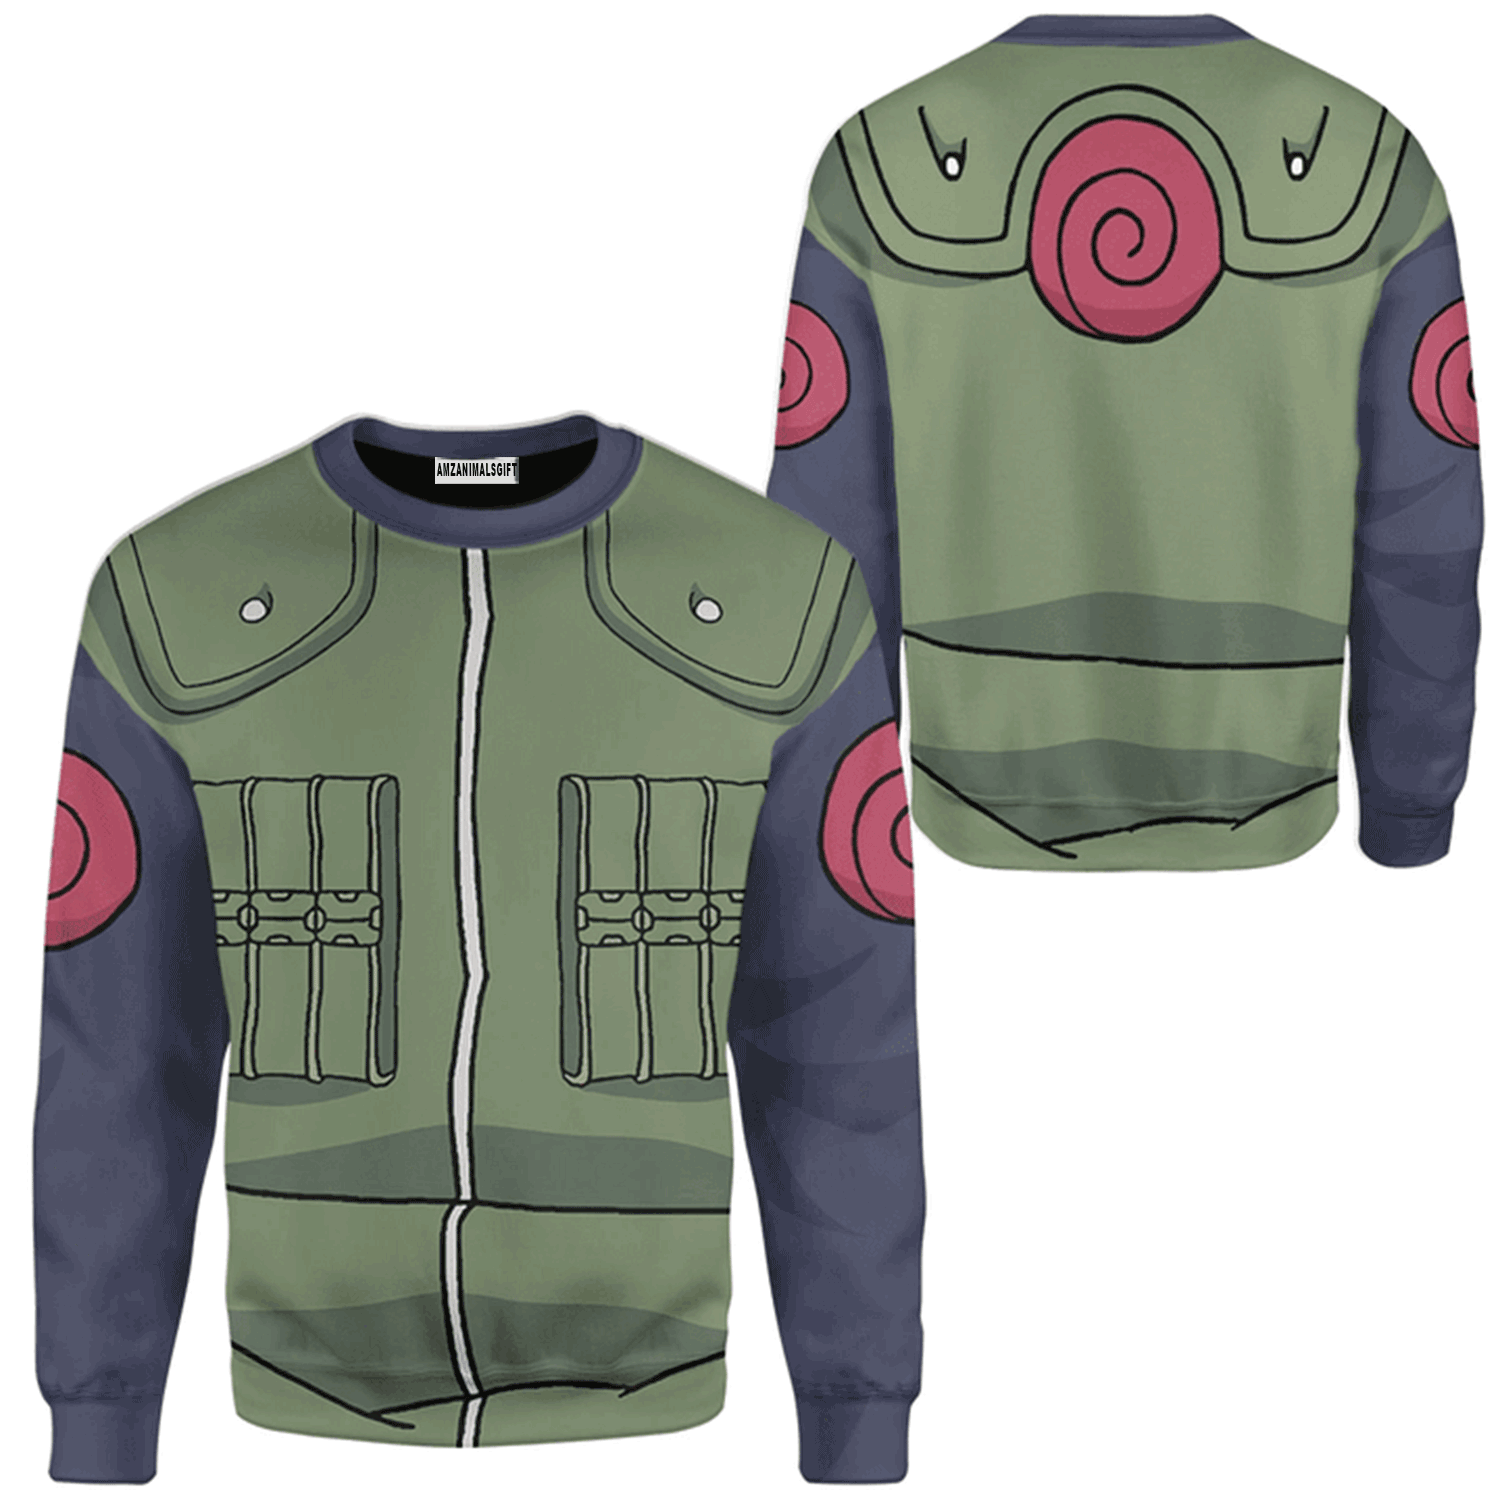 Anime Naruto Christmas Sweater Kakashi Hatake Custom Cosplay Costume, Ugly Sweater For Men & Women, Perfect Outfit For Christmas New Year Autumn Winter